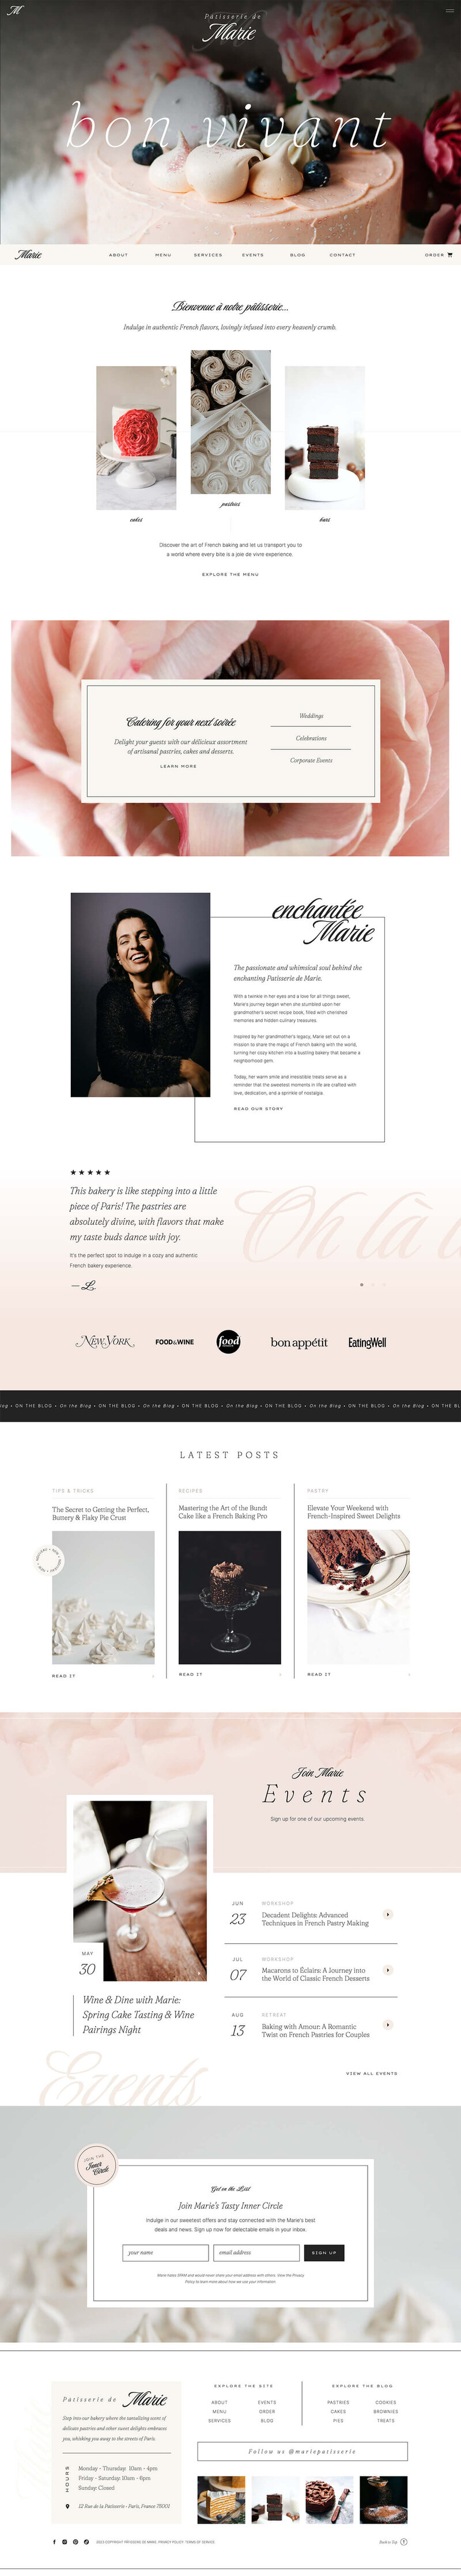 marie showit website template for restaurants and bakeries